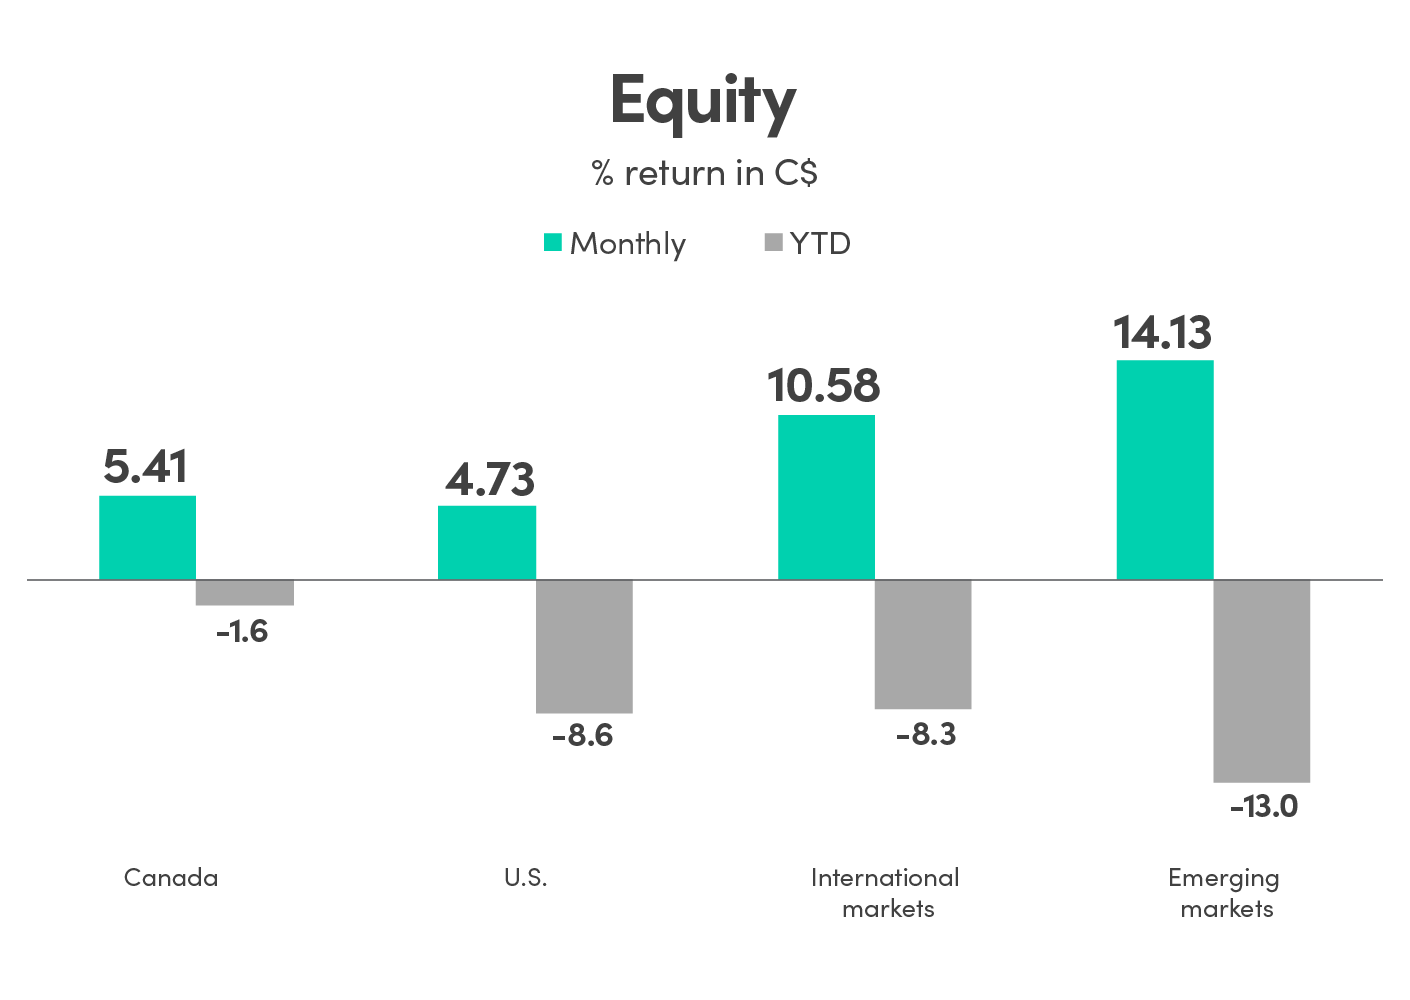 Bar graph showing % return in CAD (C$) for equity. Canada monthly return is 5.41% and YTD is -1.6%. US monthly return is 4.73% and YTD is -8.6%. International markets monthly return is 10.58% and YTD is -8.3%. Emerging markets monthly return is 14.13% and YTD is -13.0%